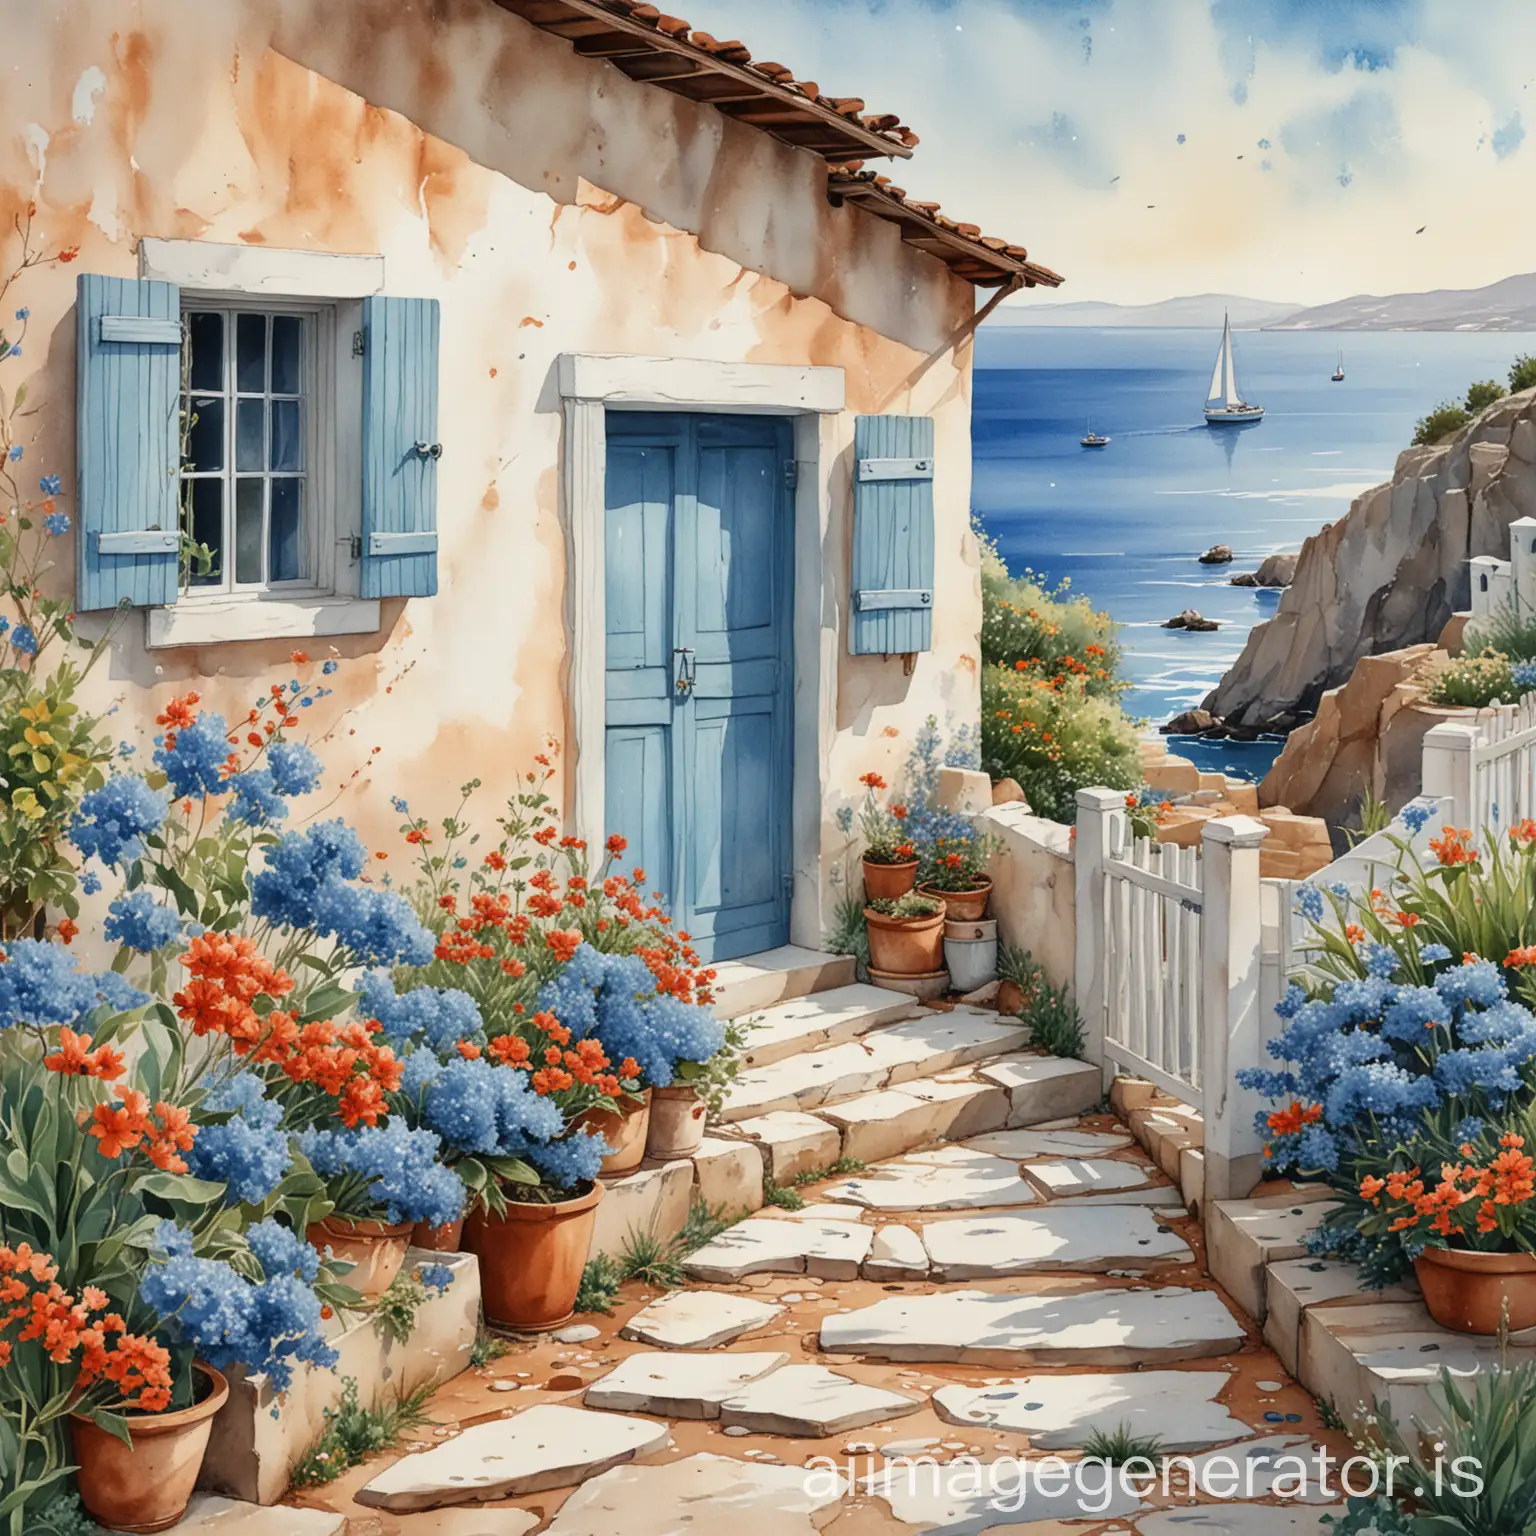 Tranquil-Watercolor-Illustration-of-a-Coastal-Greek-House-with-Vibrant-Floral-Accents